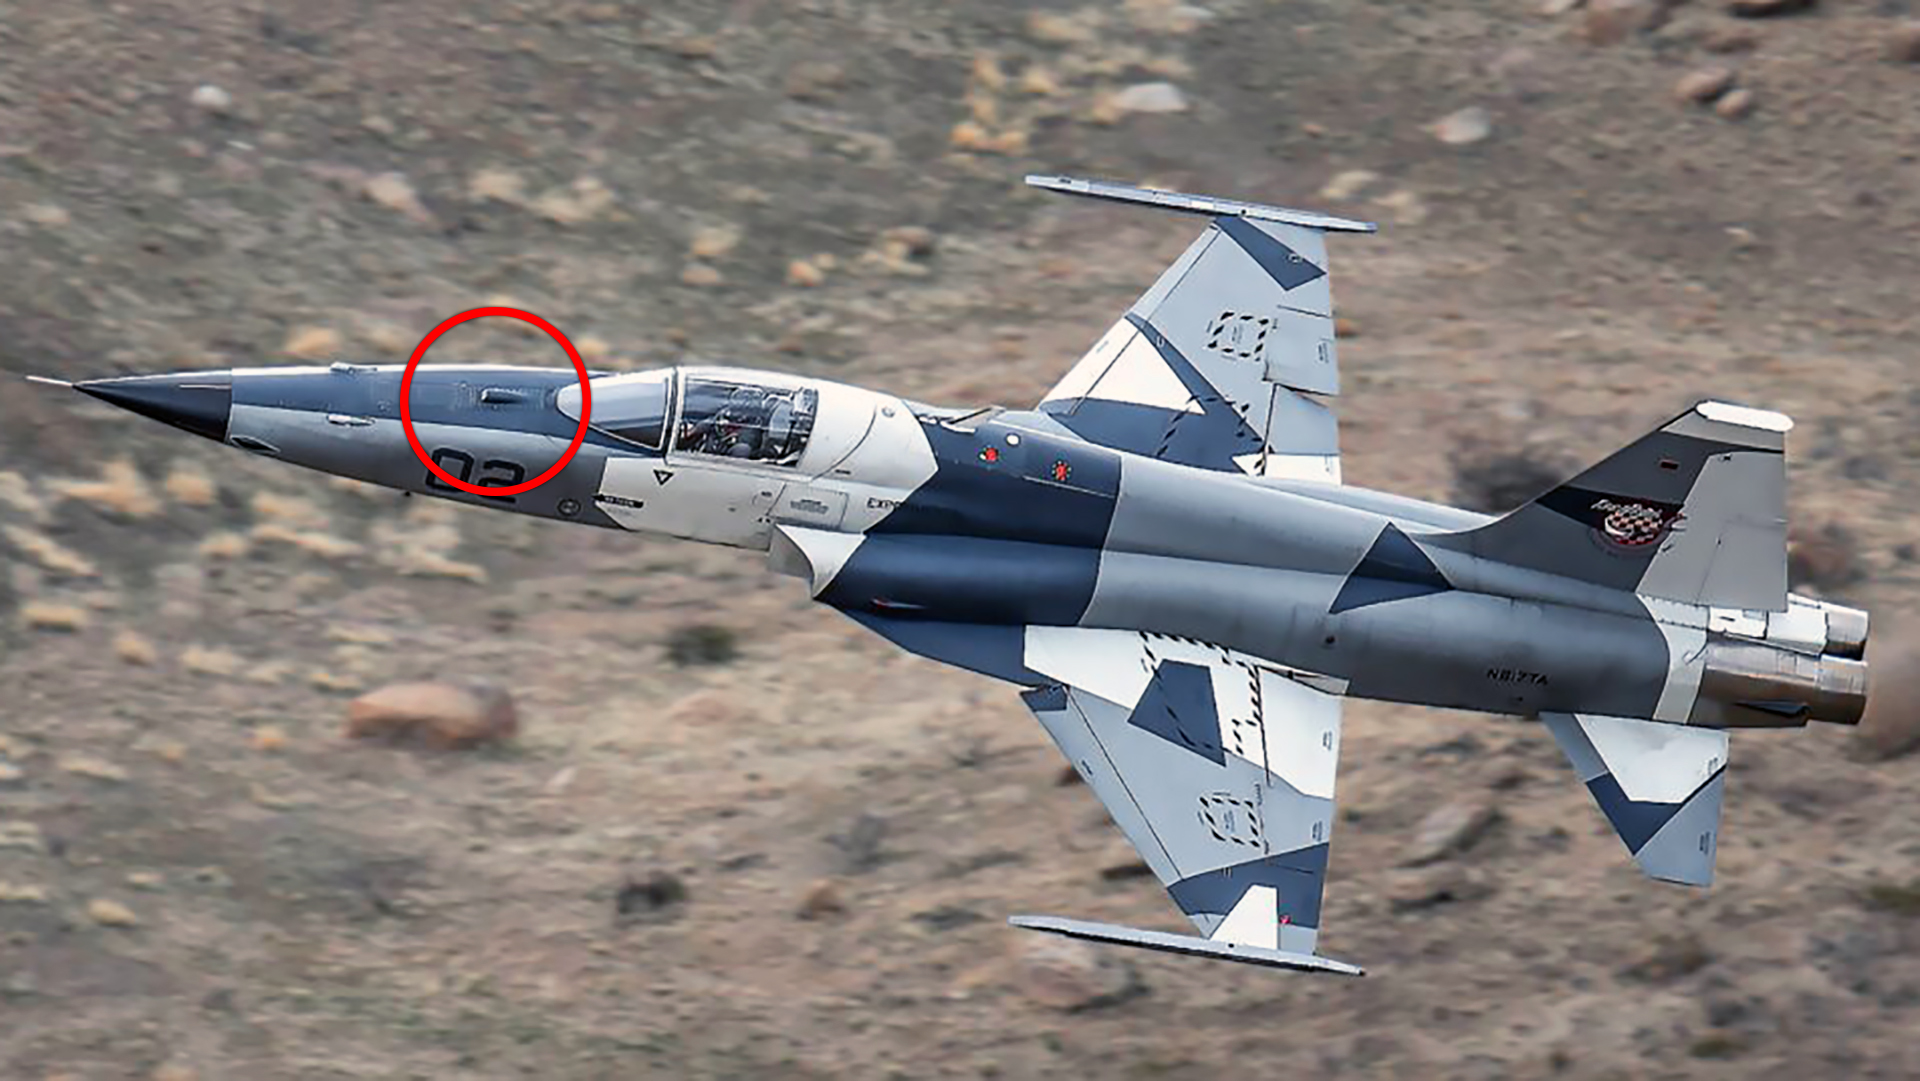 Tactical Air Support's F-5AT tests TacIRST